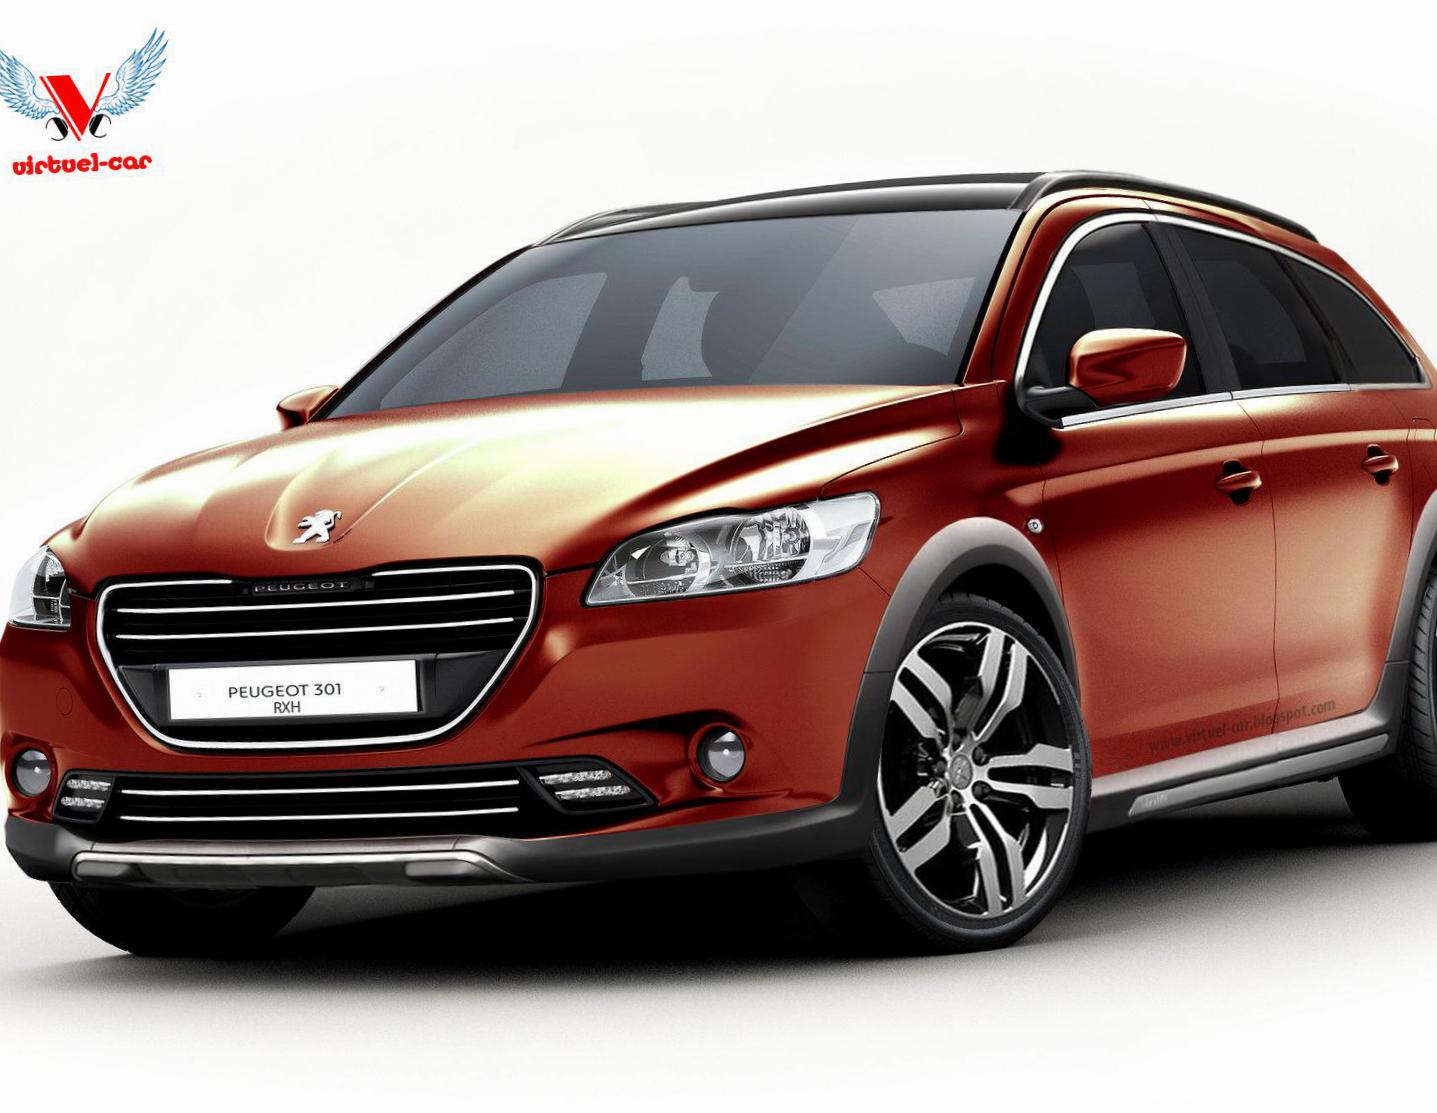 Peugeot 301 approved wagon